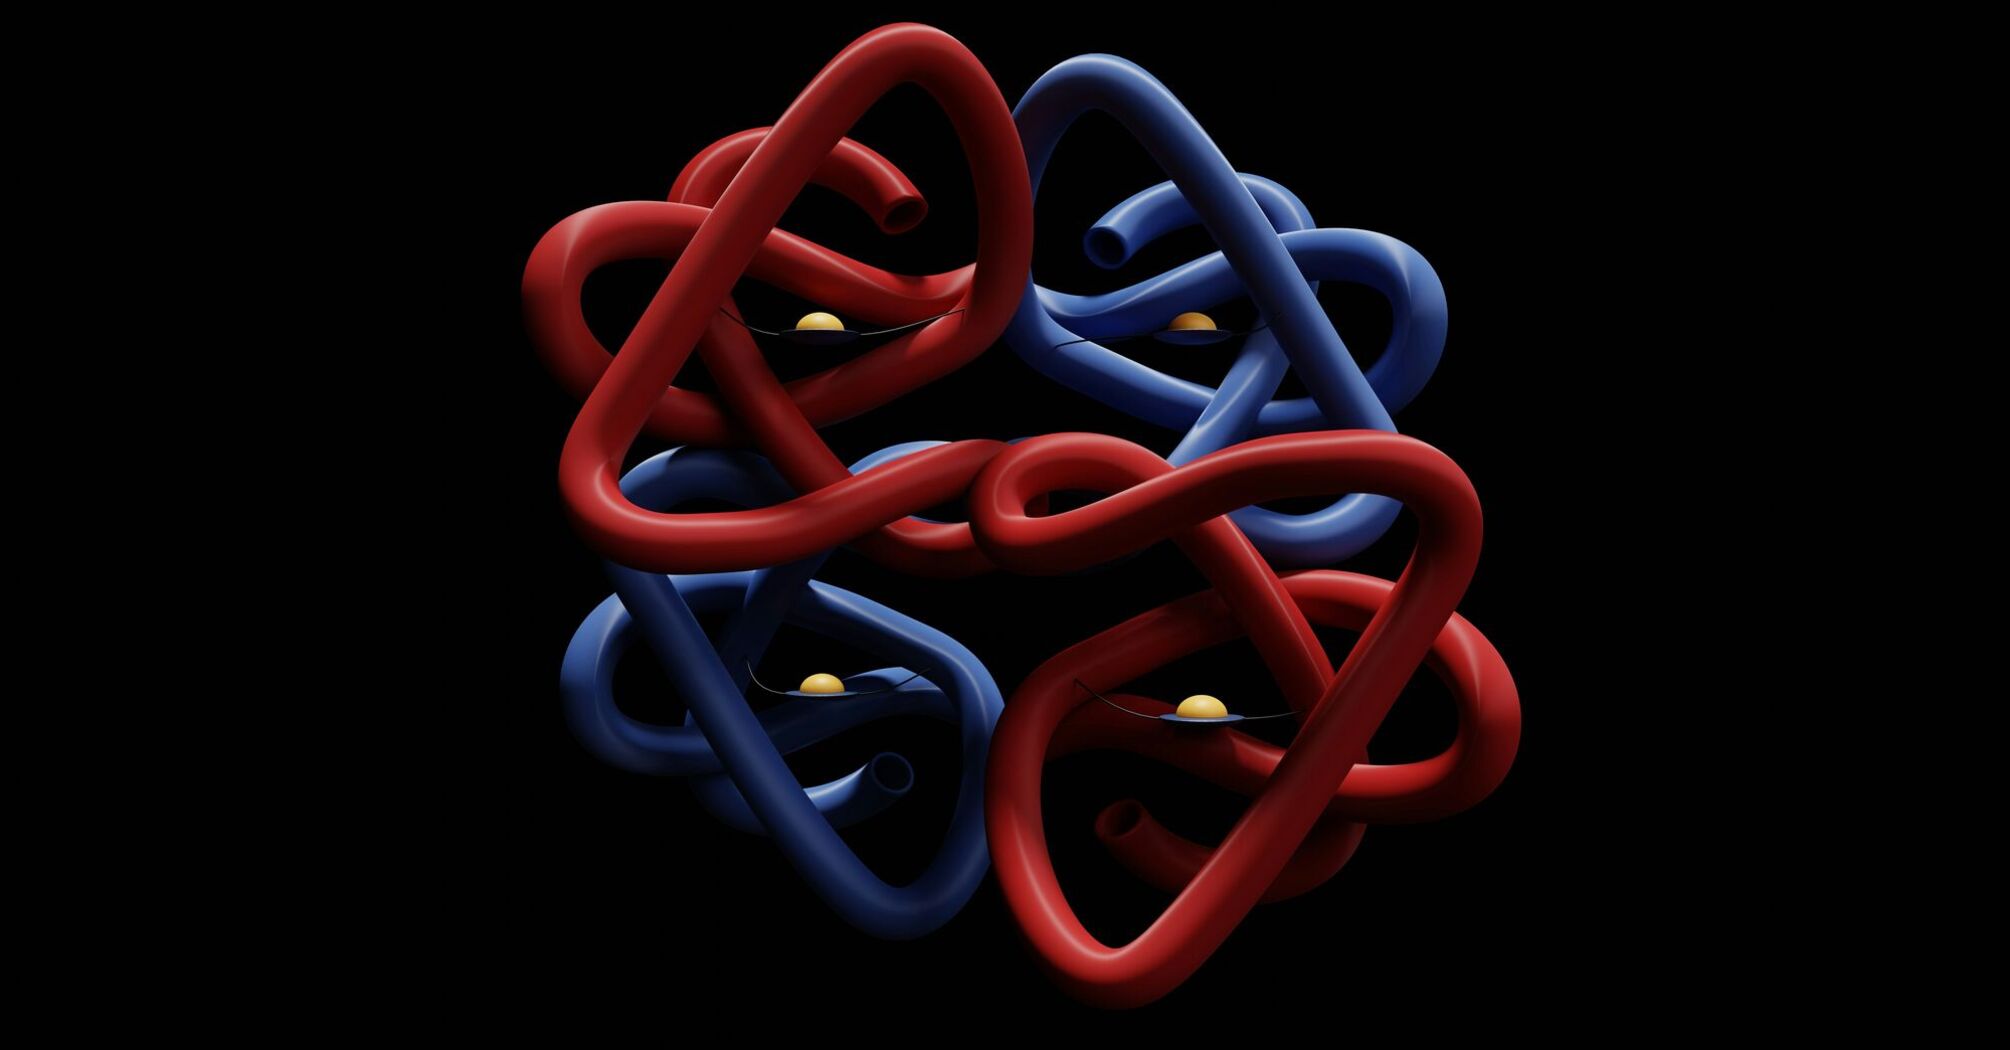 A red blue and black object with a black background